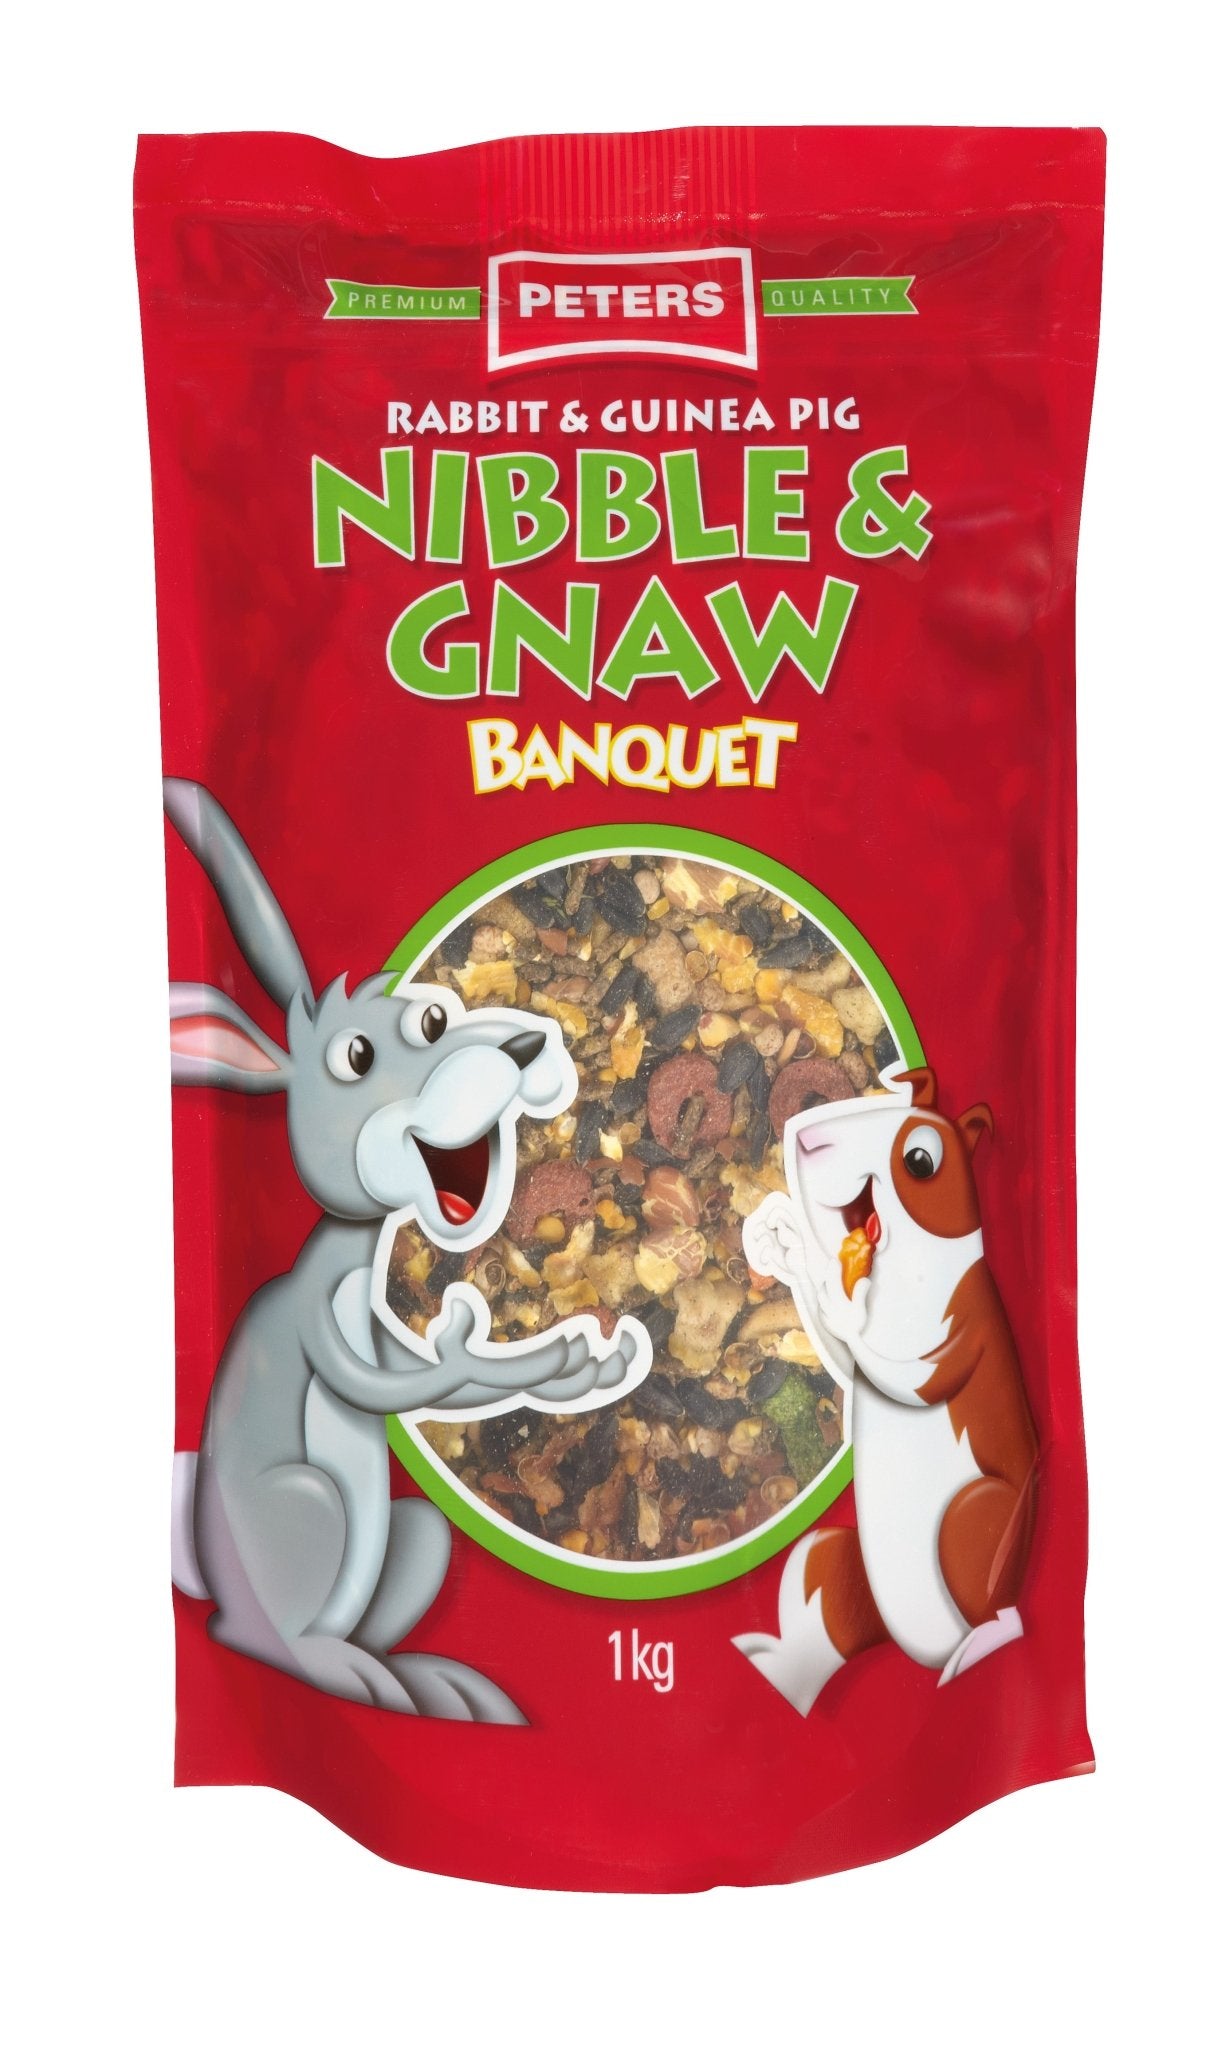 Peters Rabbit and Guinea Pig Nibble and Gnaw Banquet 1kg - Woonona Petfood & Produce